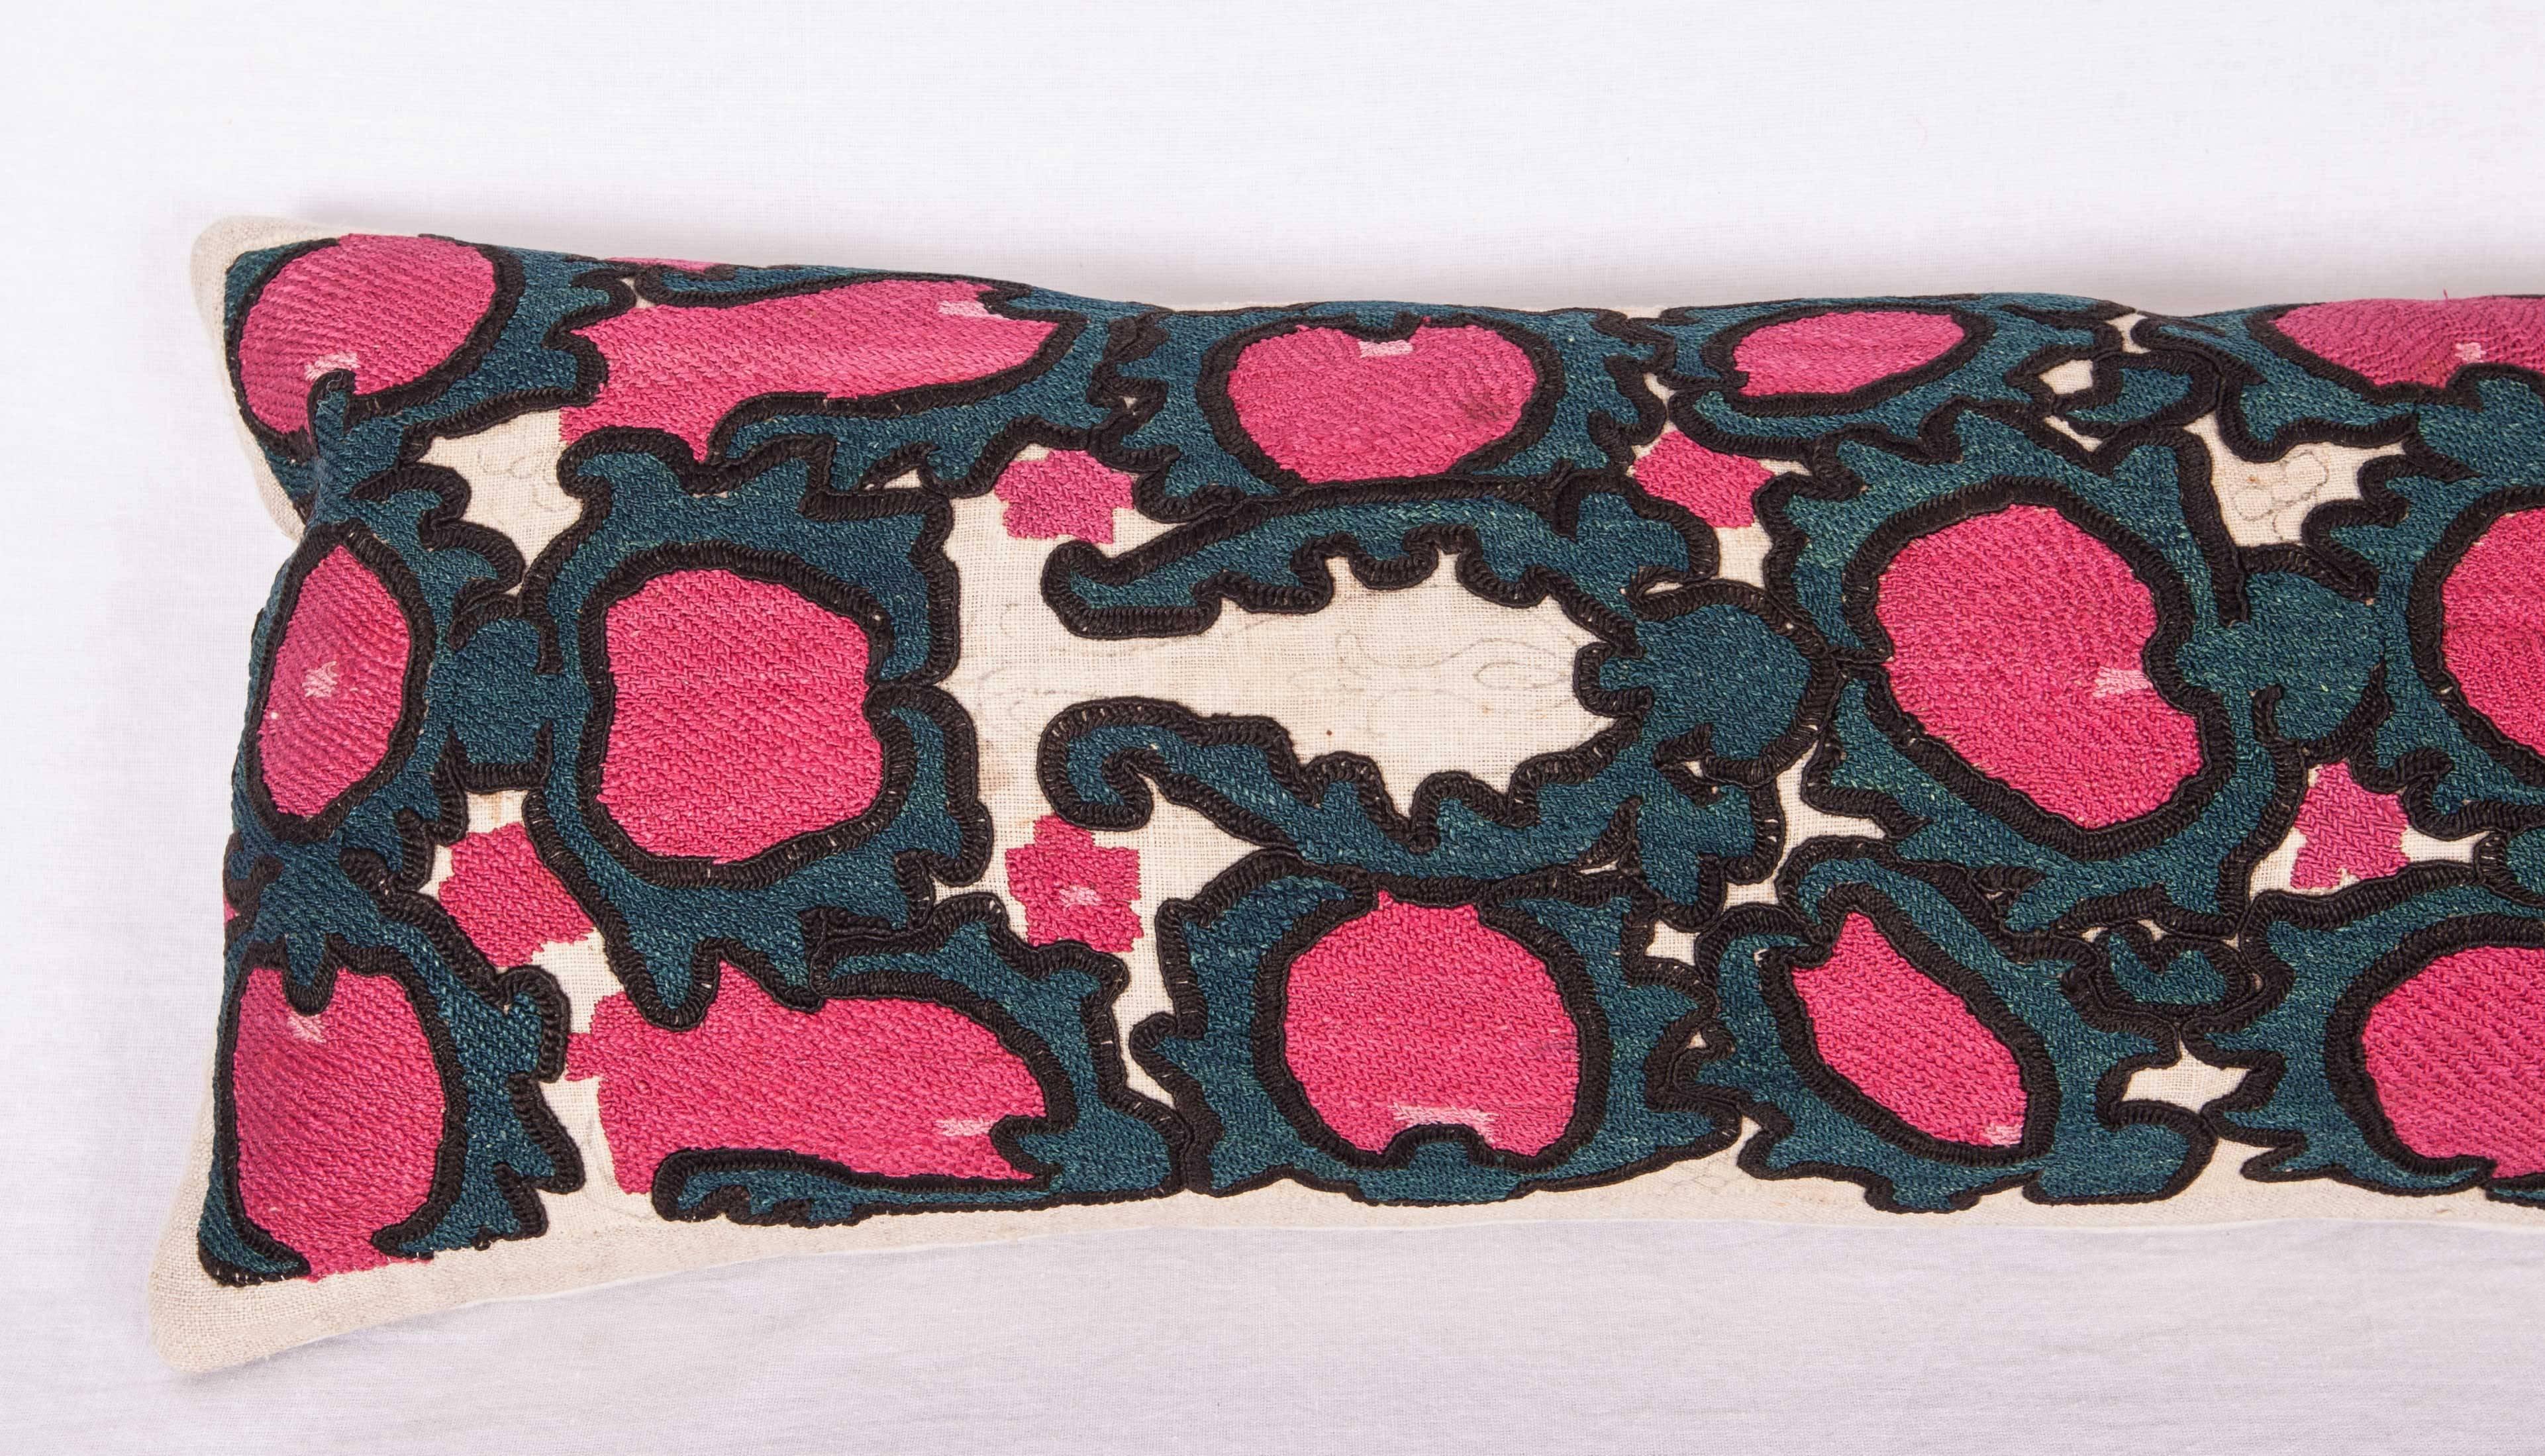 The pillow is made out of a 19th century, Tajik Suzani fragment. It does not come with an insert but it comes with a bag made to the size and out of cotton to accommodate the filling. The backing is made of linen. Please note filling is not